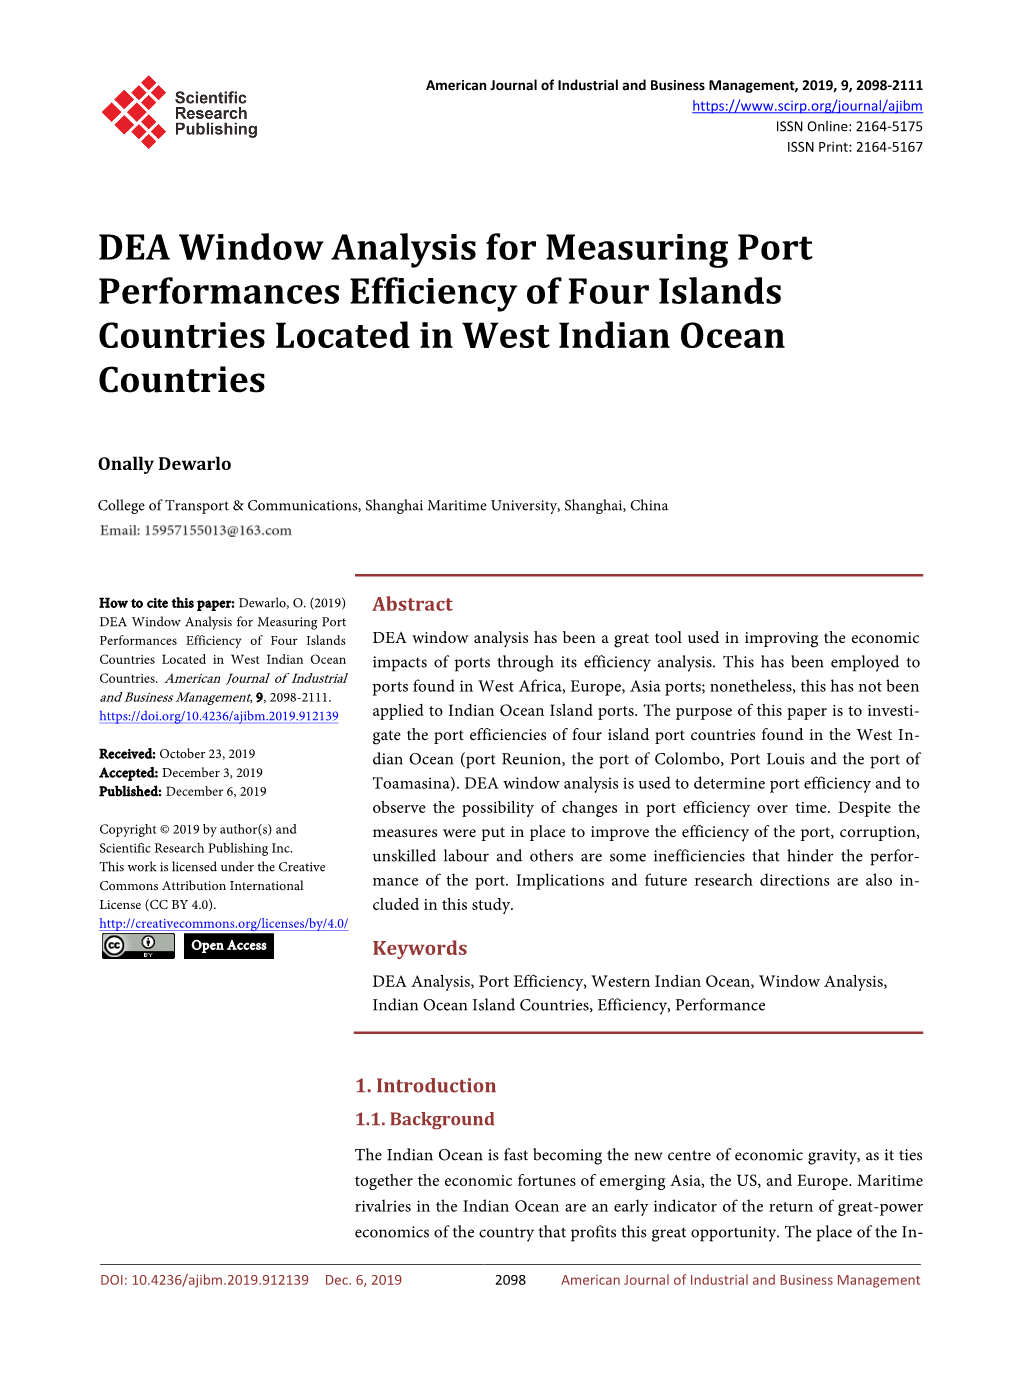 DEA Window Analysis for Measuring Port Performances Efficiency of Four Islands Countries Located in West Indian Ocean Countries